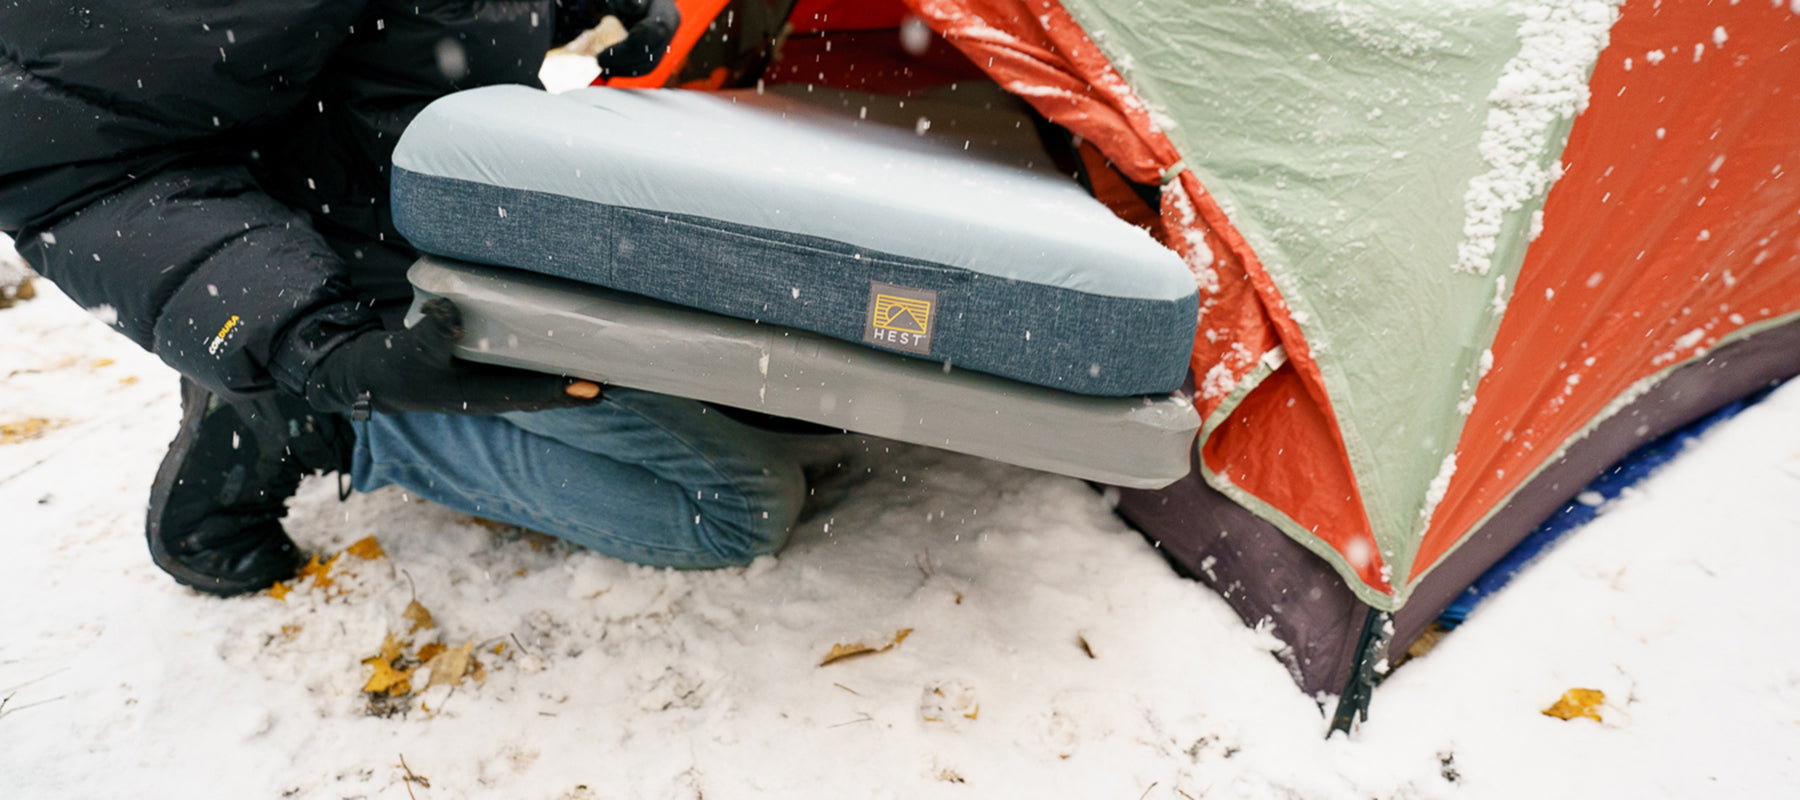 HEST sleep system used in a snowy landscape being placed inside a tent during winter.